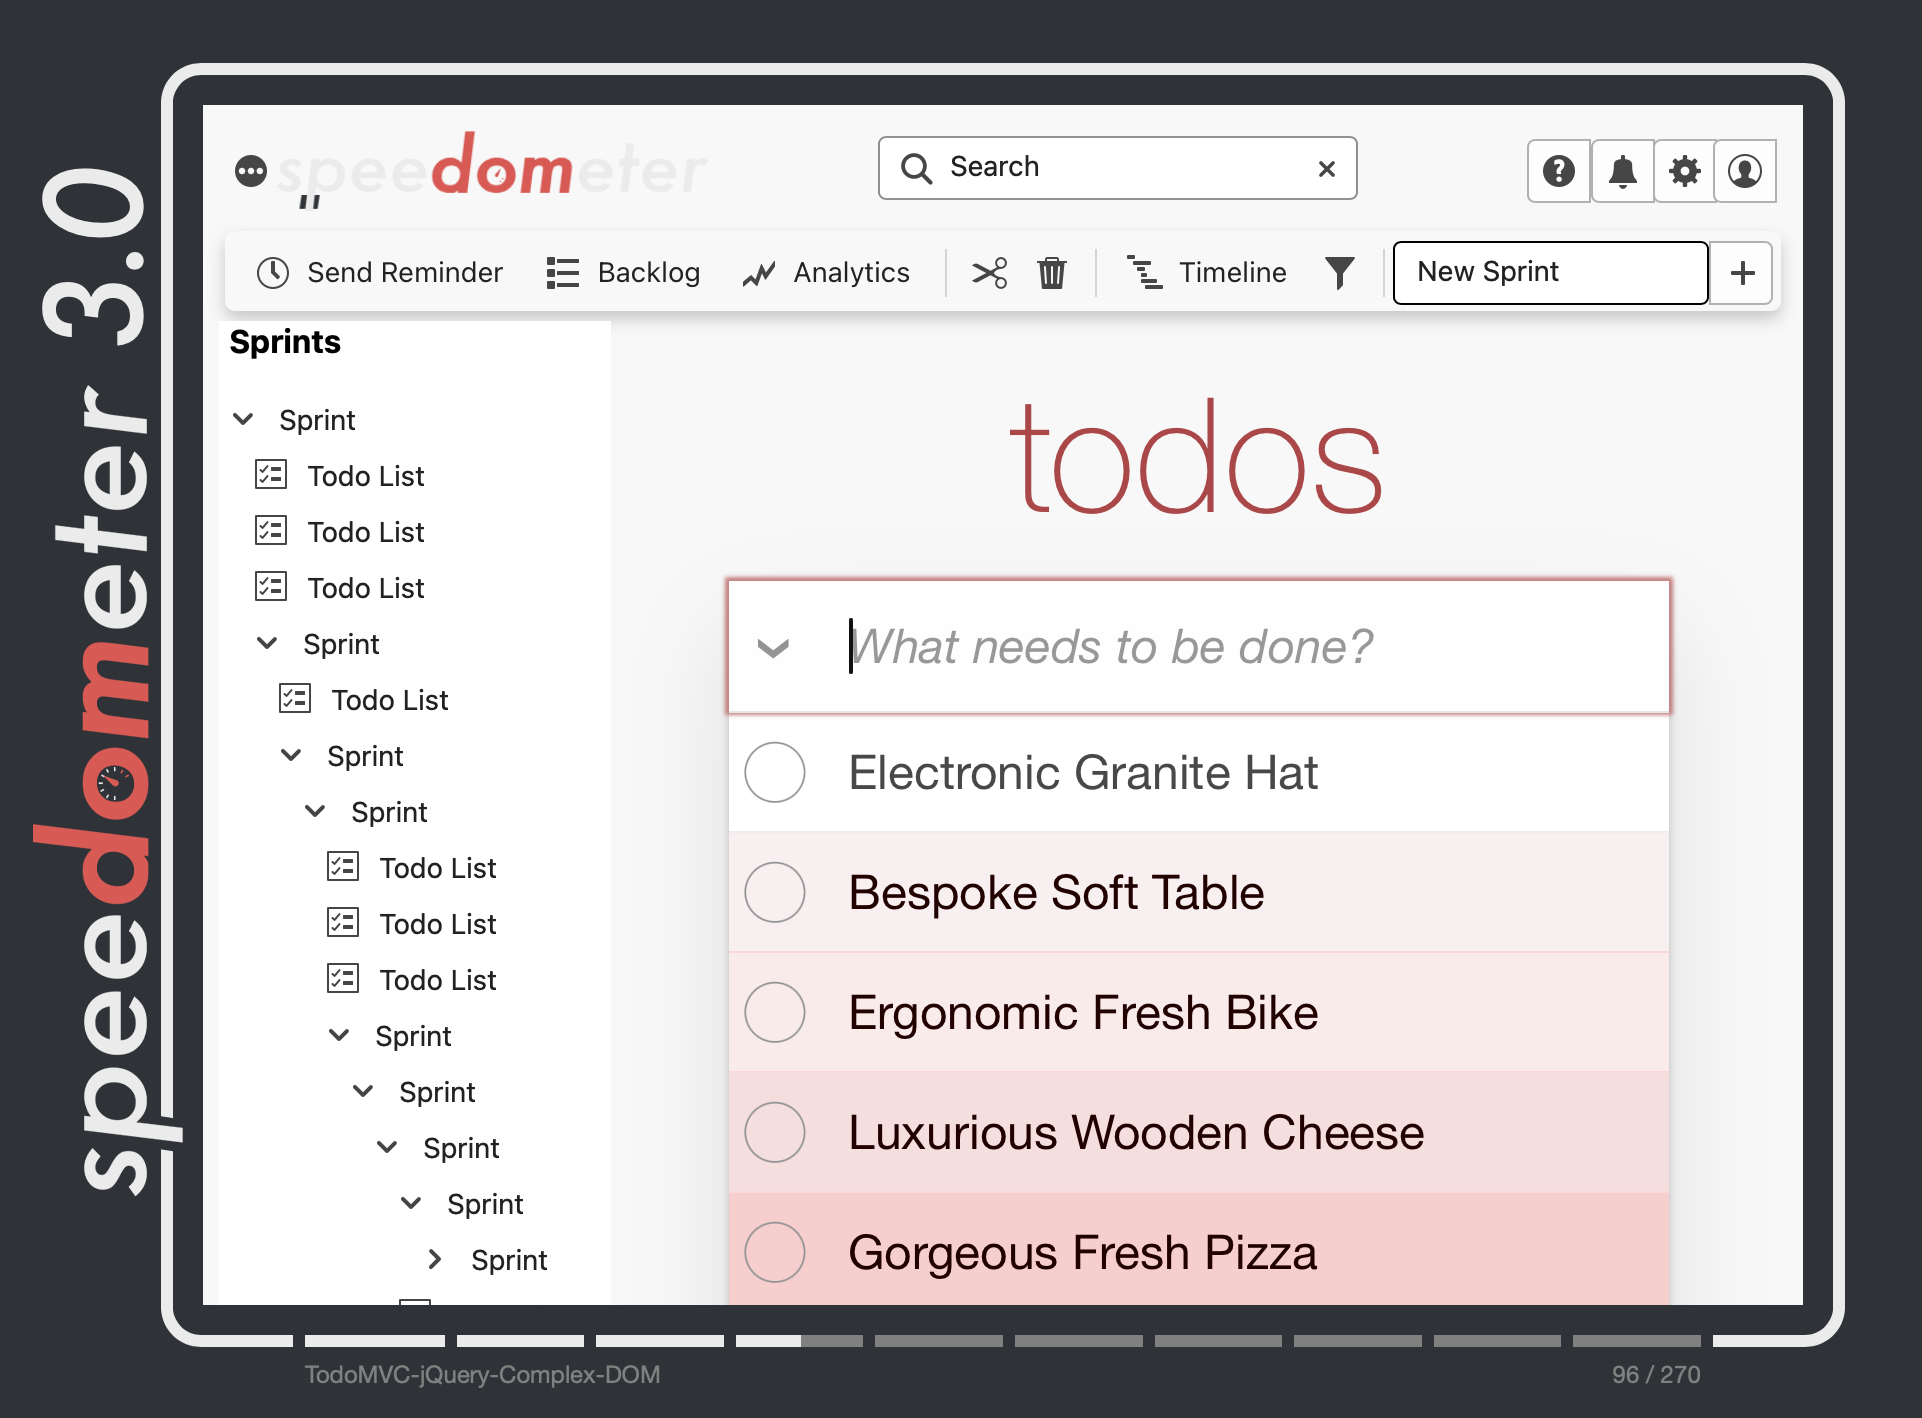 Complex DOM workloads has ribbon menus, side bar tree view, search field, and other complex UI elements surrounding the todo app.